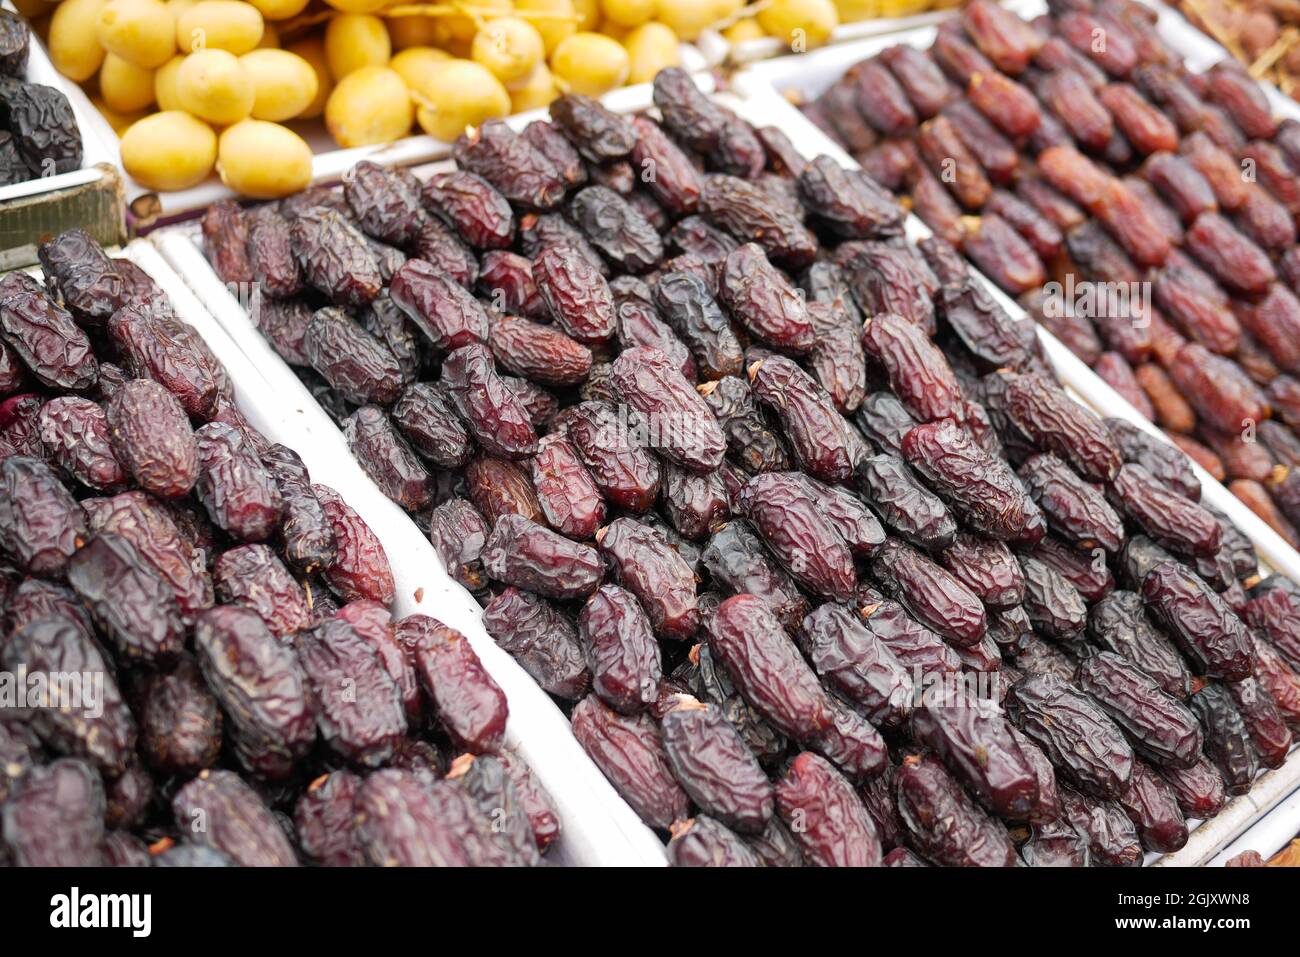 many date fruits display for sale at local market  Stock Photo